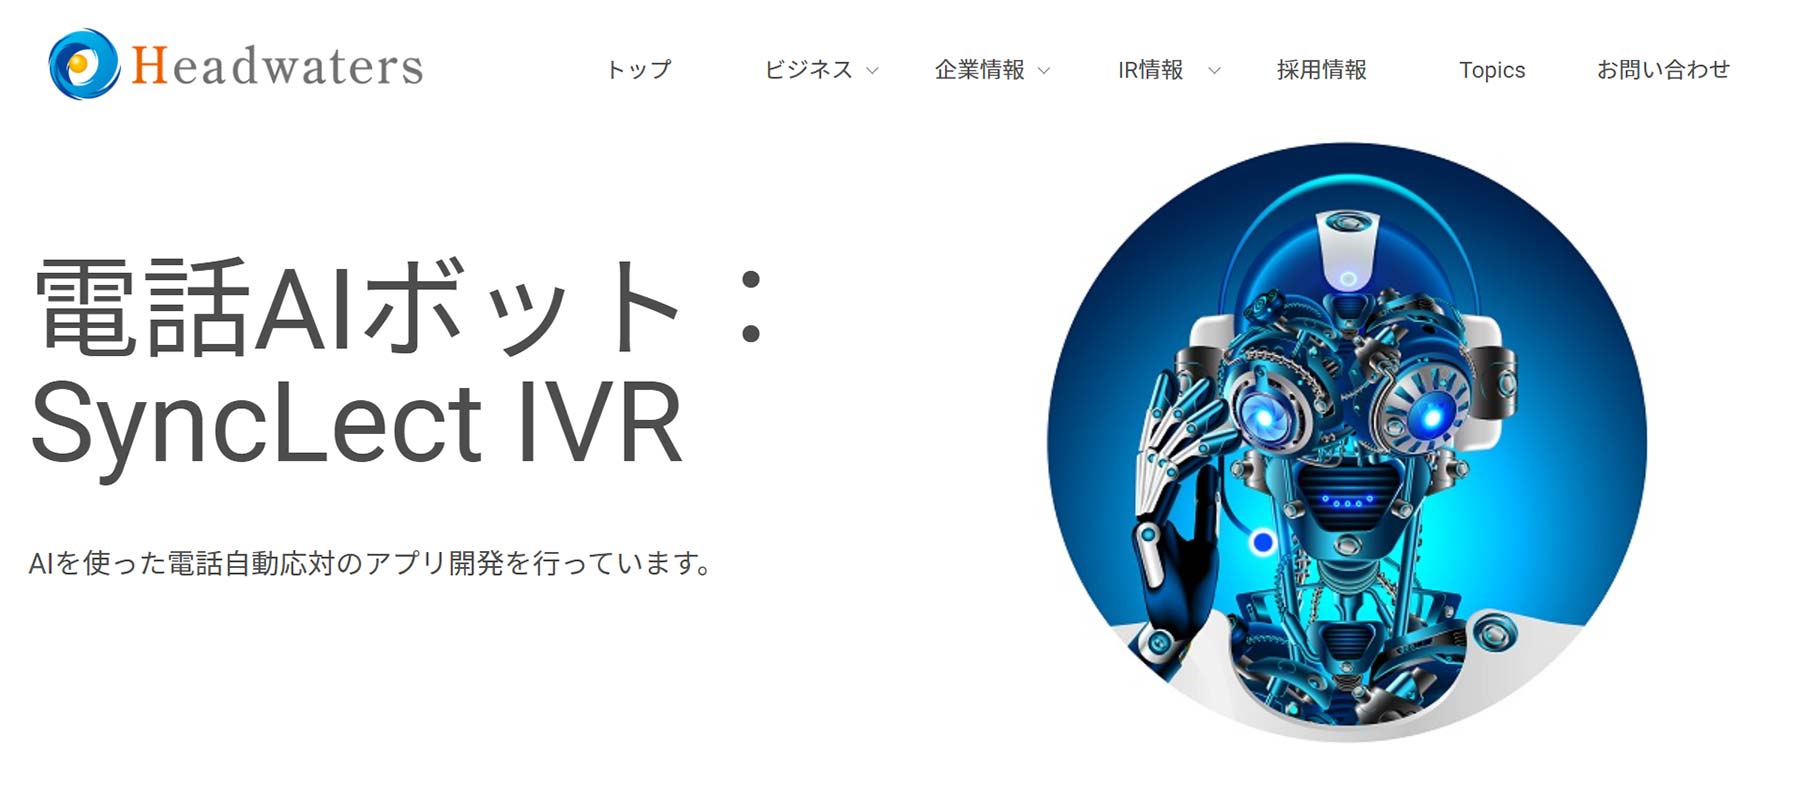 SyncLect IVR公式Webサイト